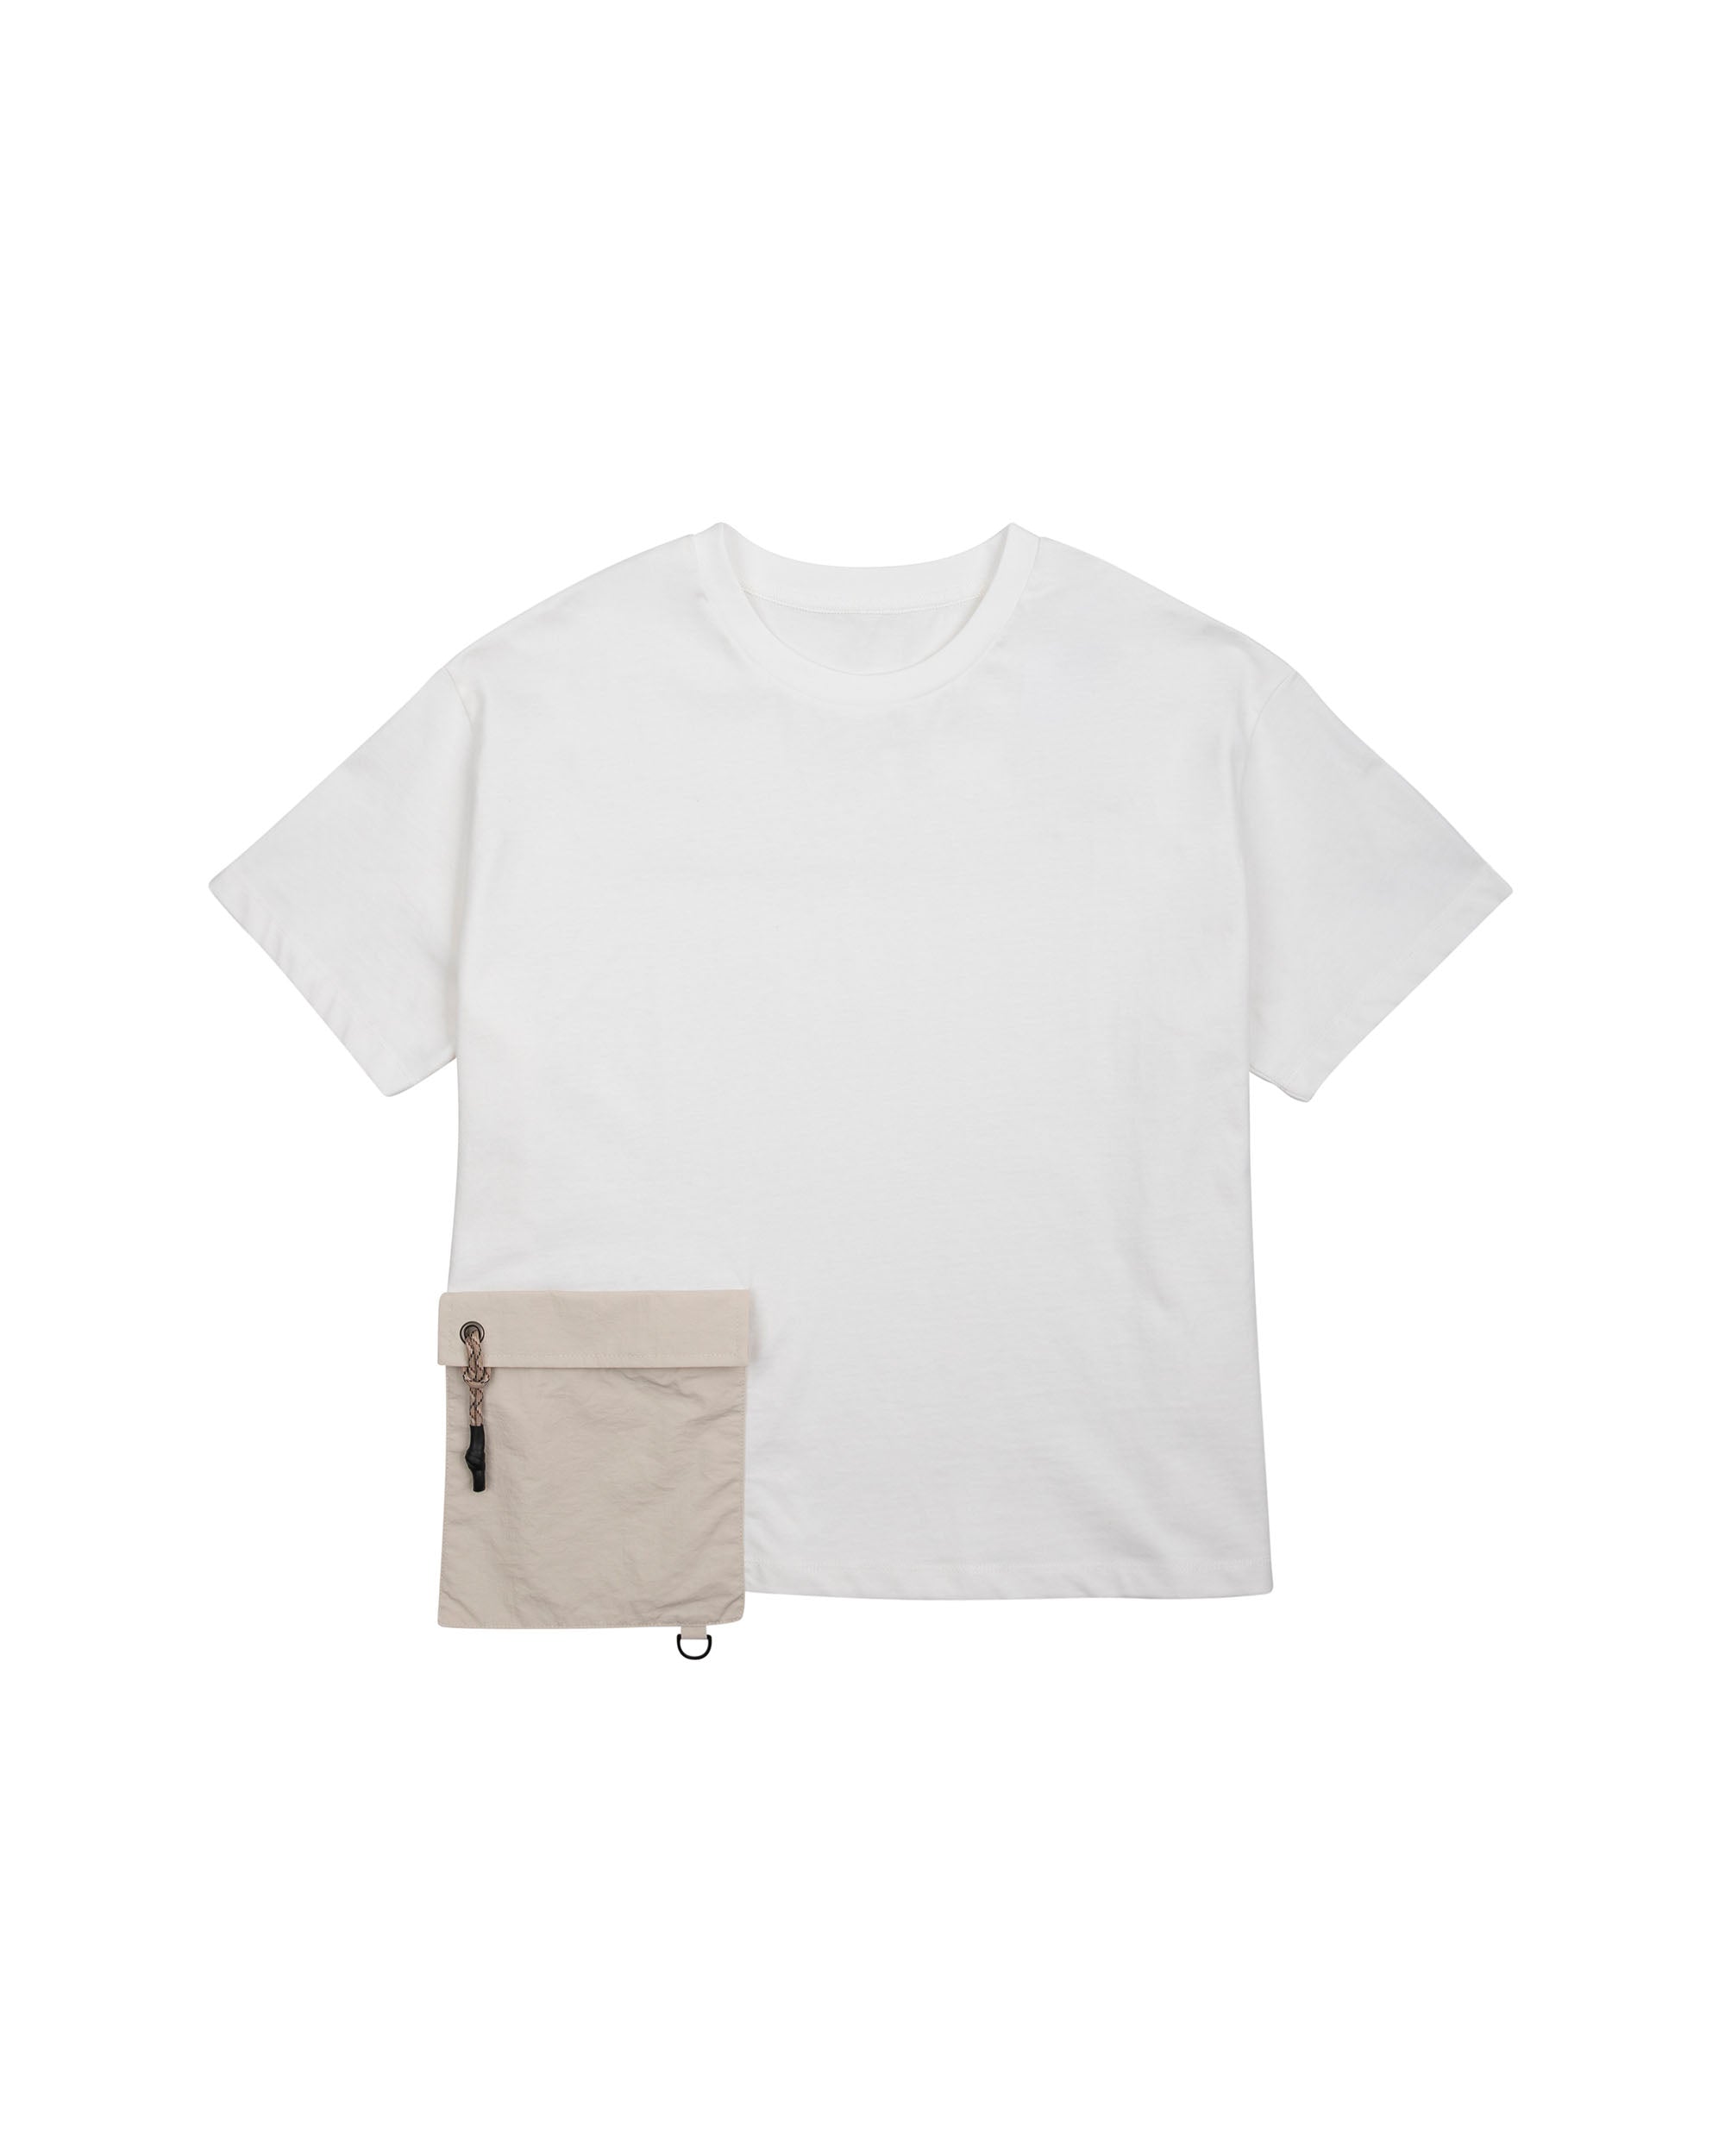 A.T OUTDOOR Pocket Cotton Tee